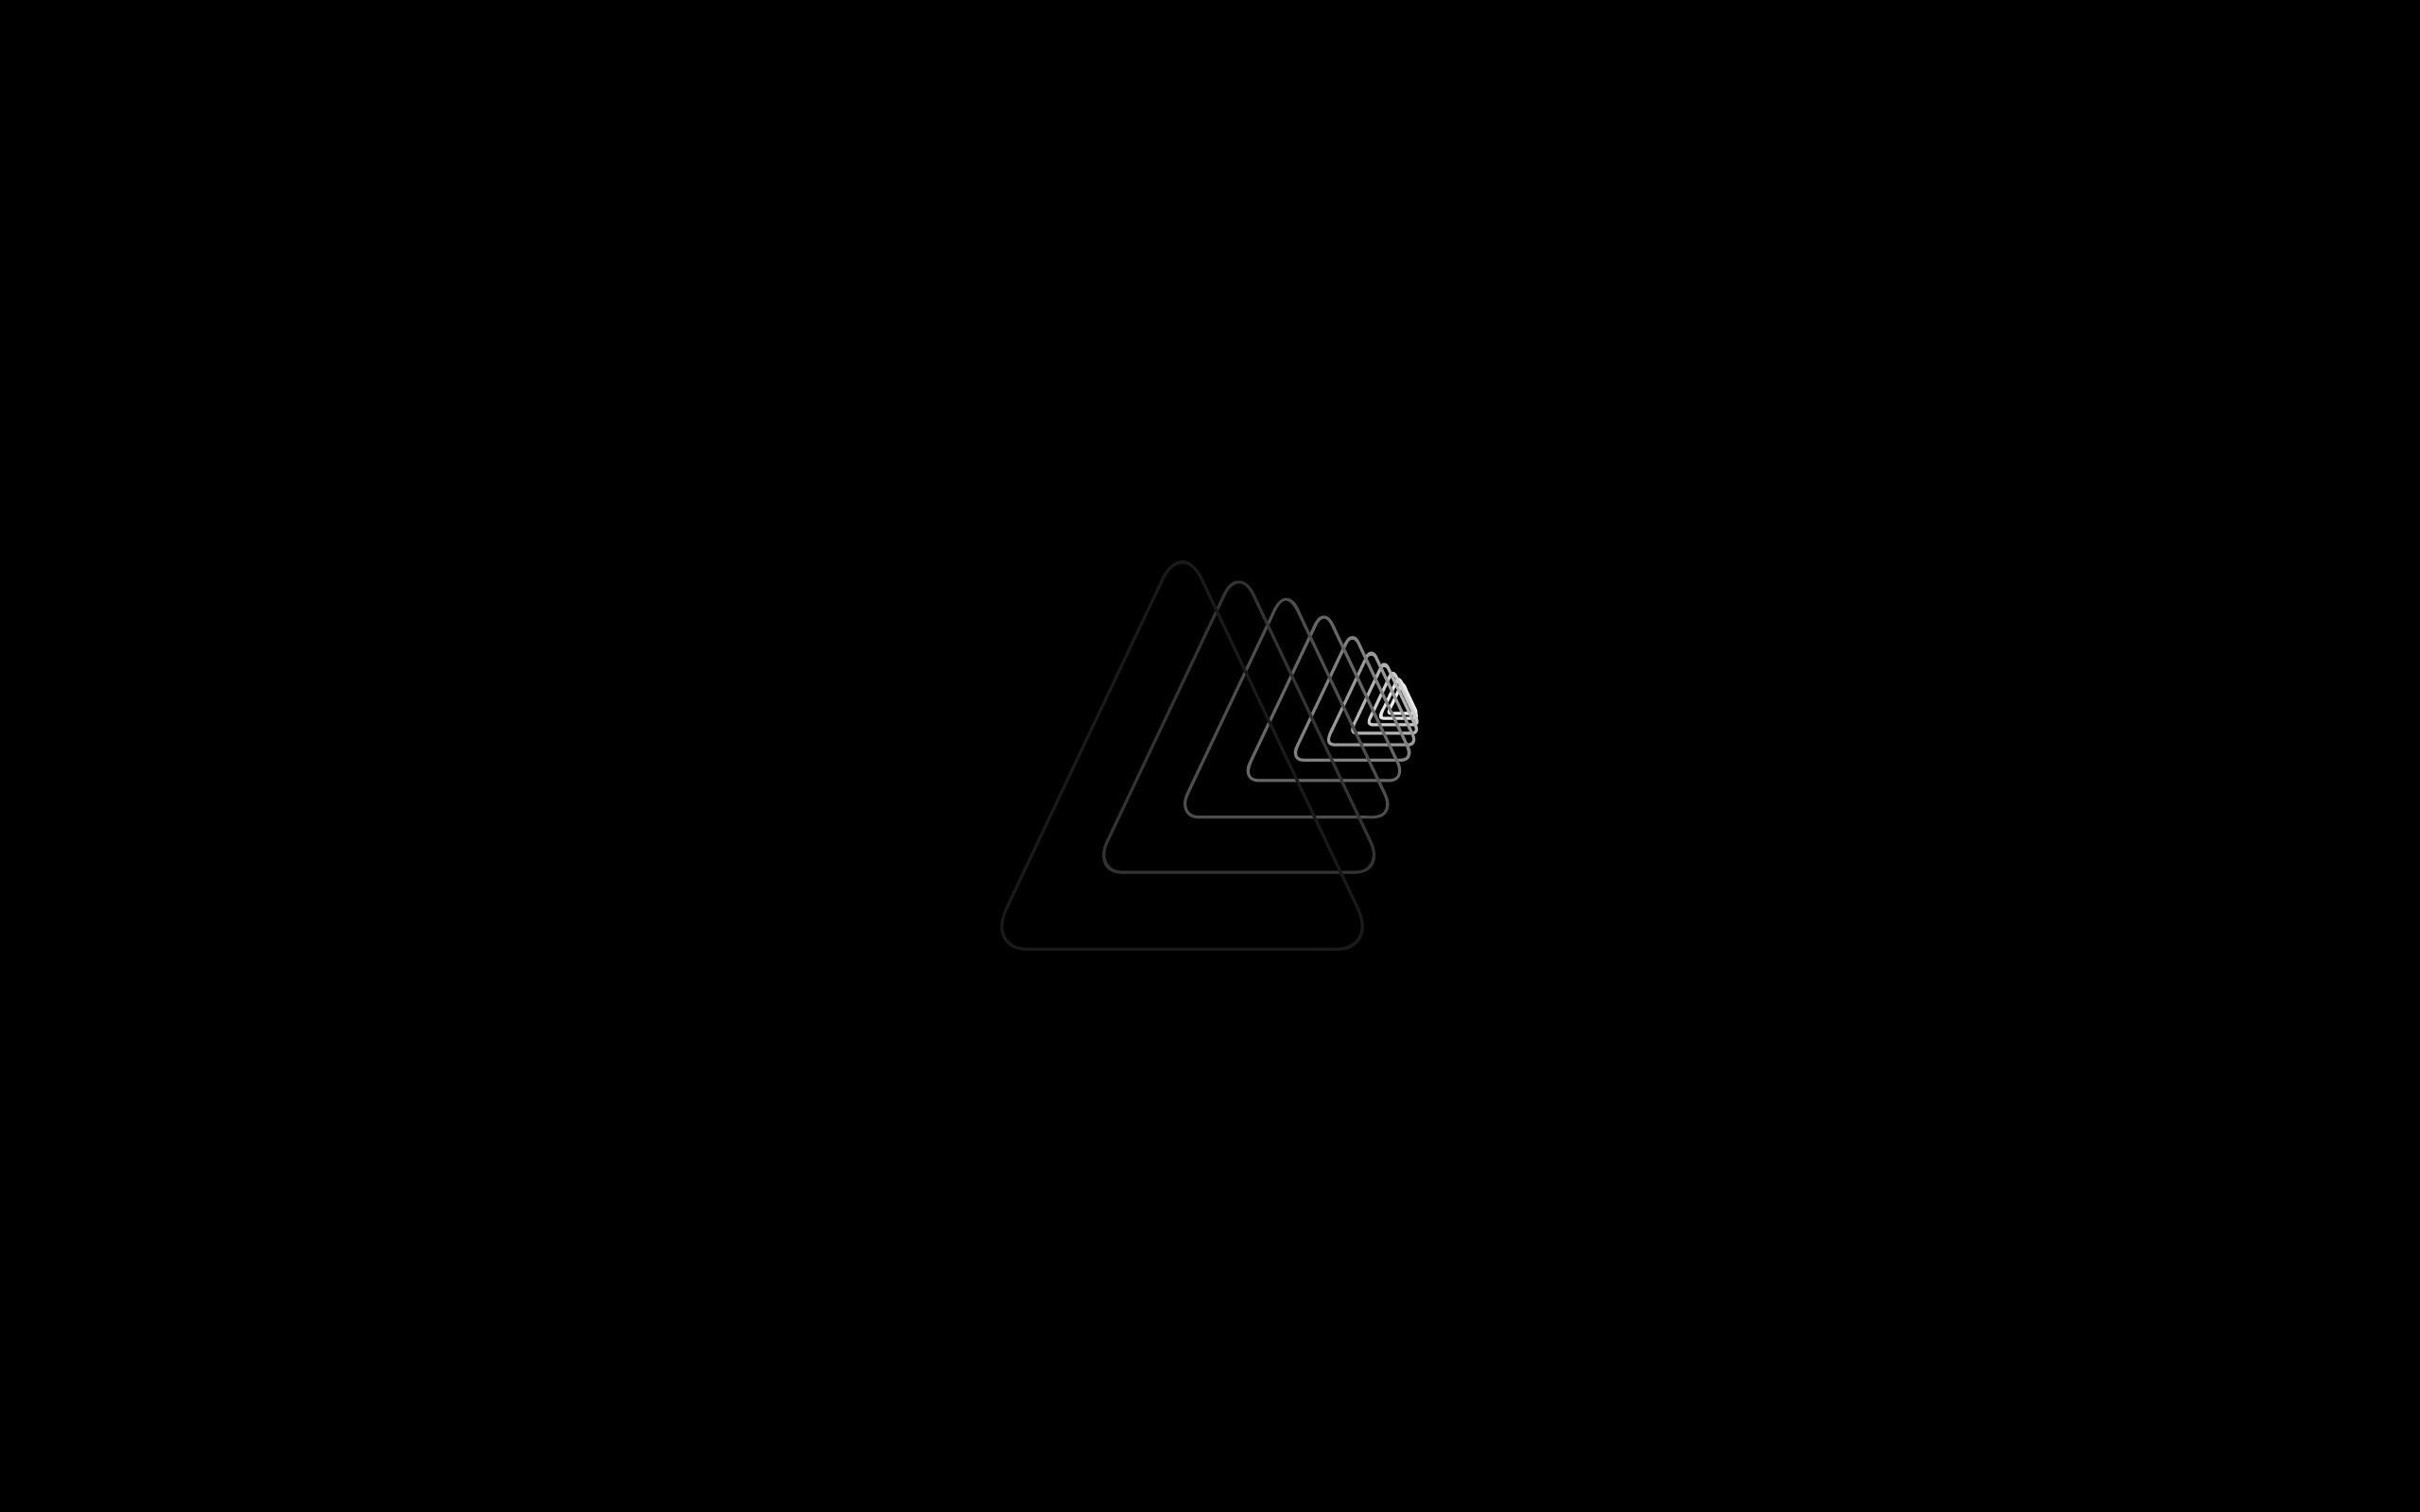 minimalism, triangle, darkness, simplicity wallpaper for mobile